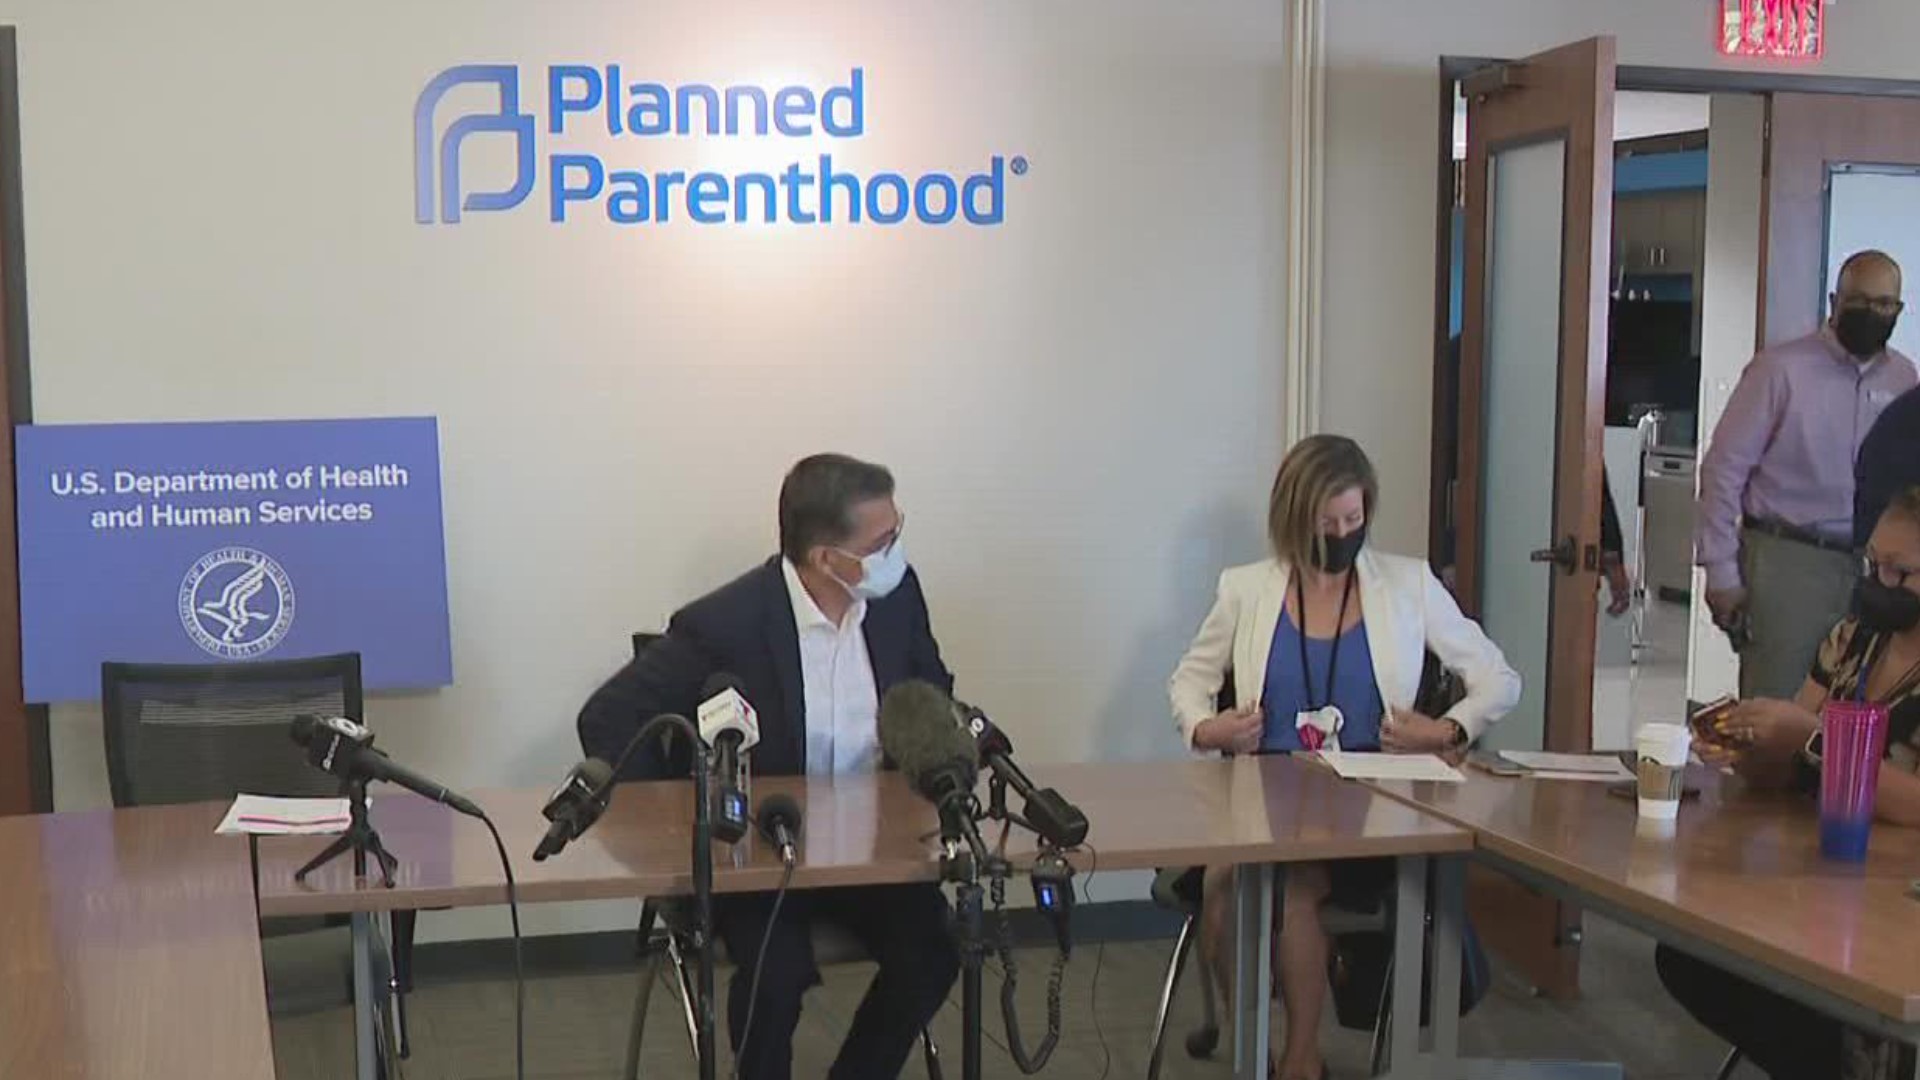 U.S. Health Secretary Xavier Becerra visited Phoenix this week to meet with abortion providers and discuss Arizona's legal challenges in a post-Roe society.